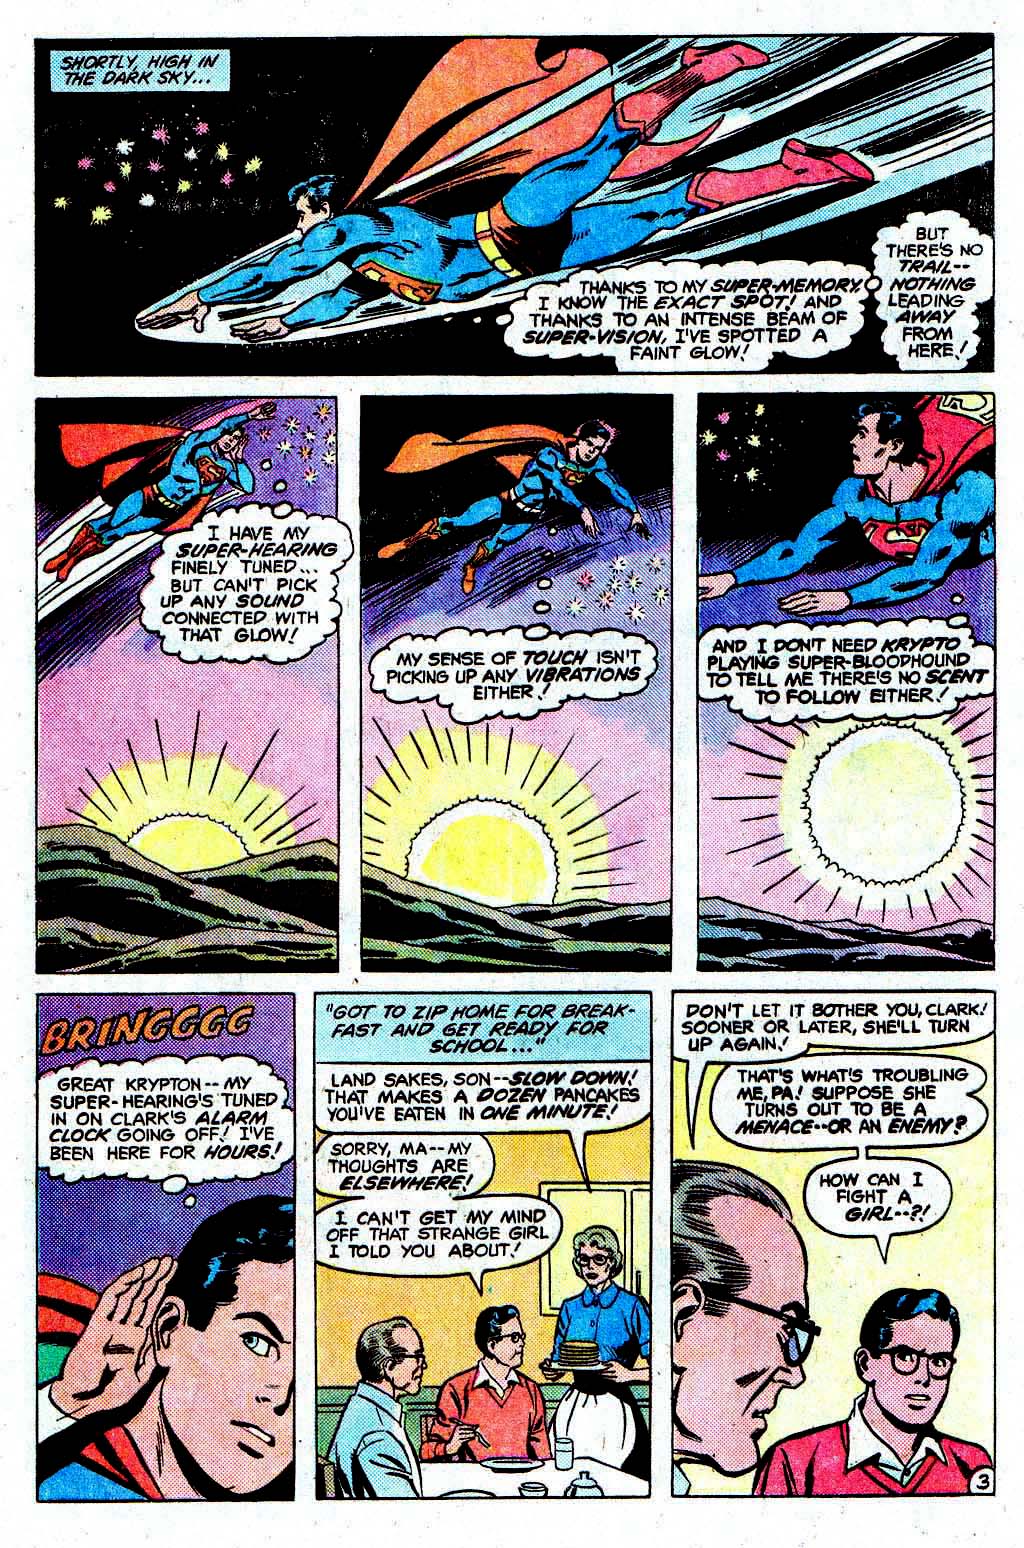 The New Adventures of Superboy 35 Page 4